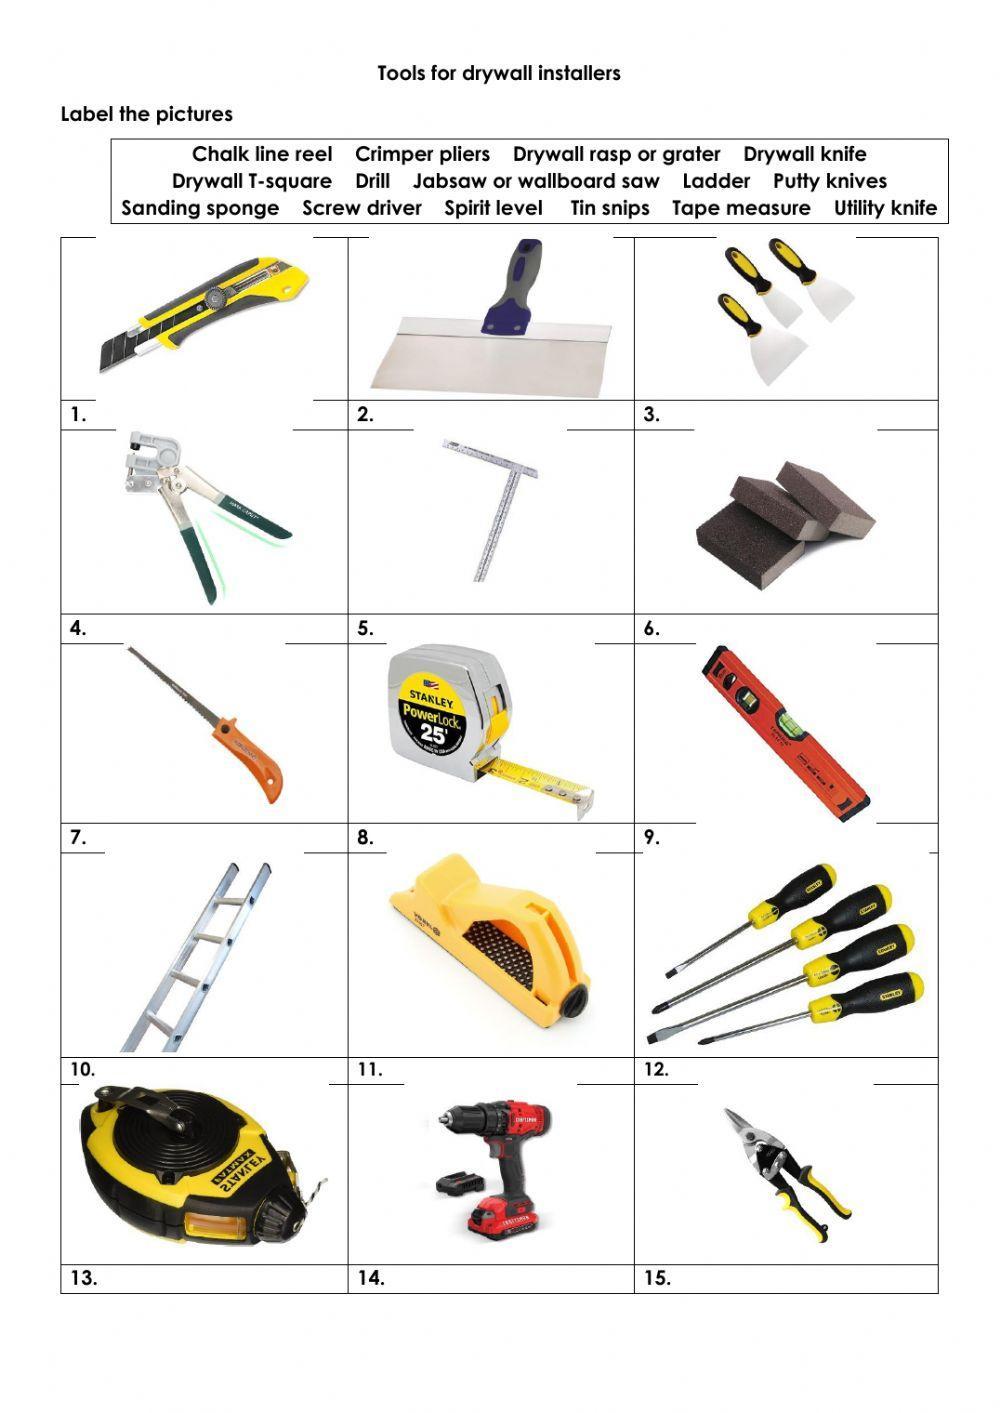 Tools for Drywall installers